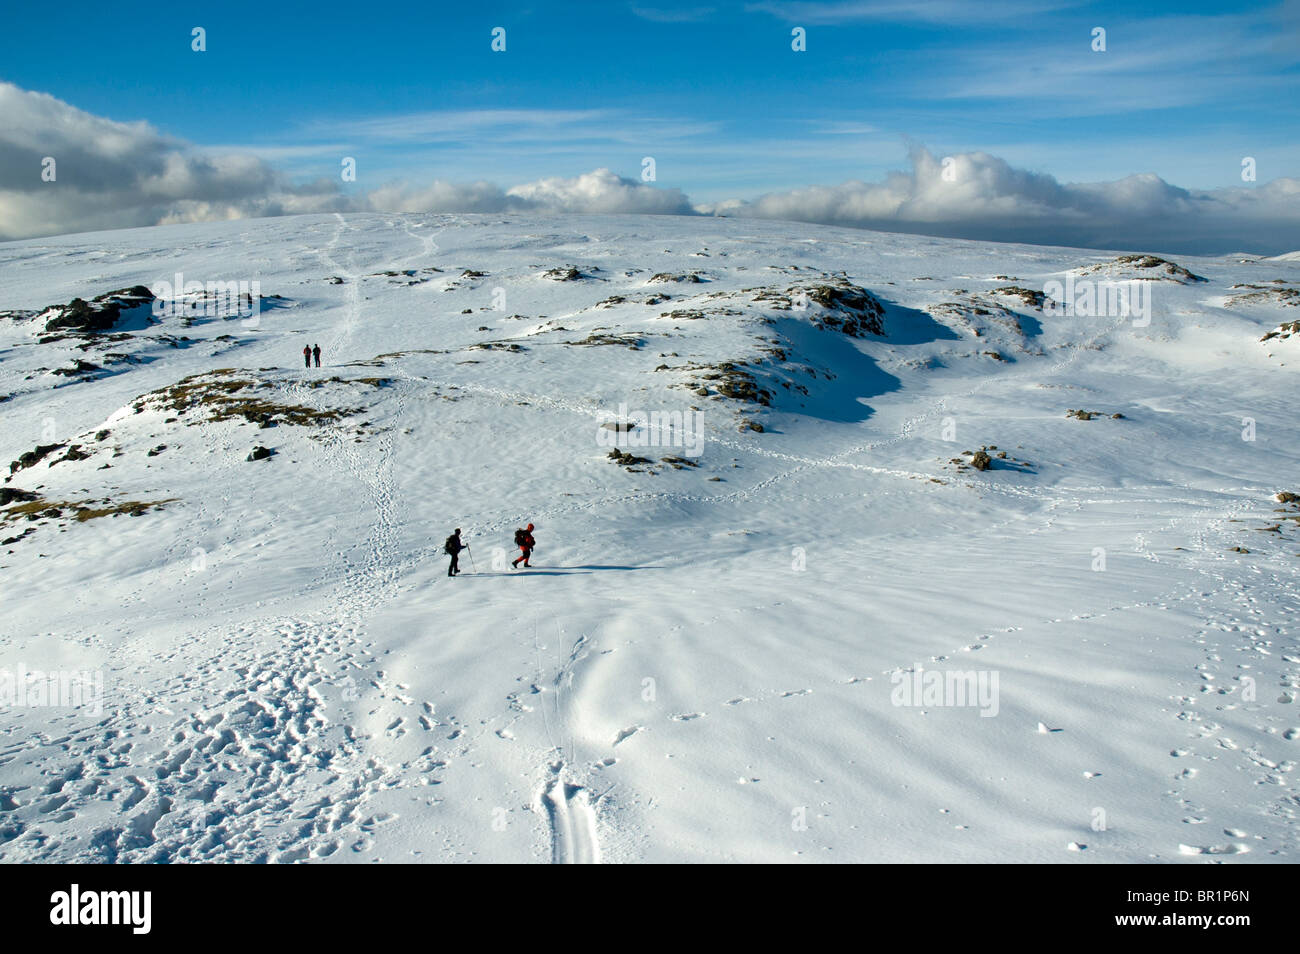 Hill walkers in snow on the High Raise plateau in winter, near Grasmere, Lake District, Cumbria, England, UK Stock Photo